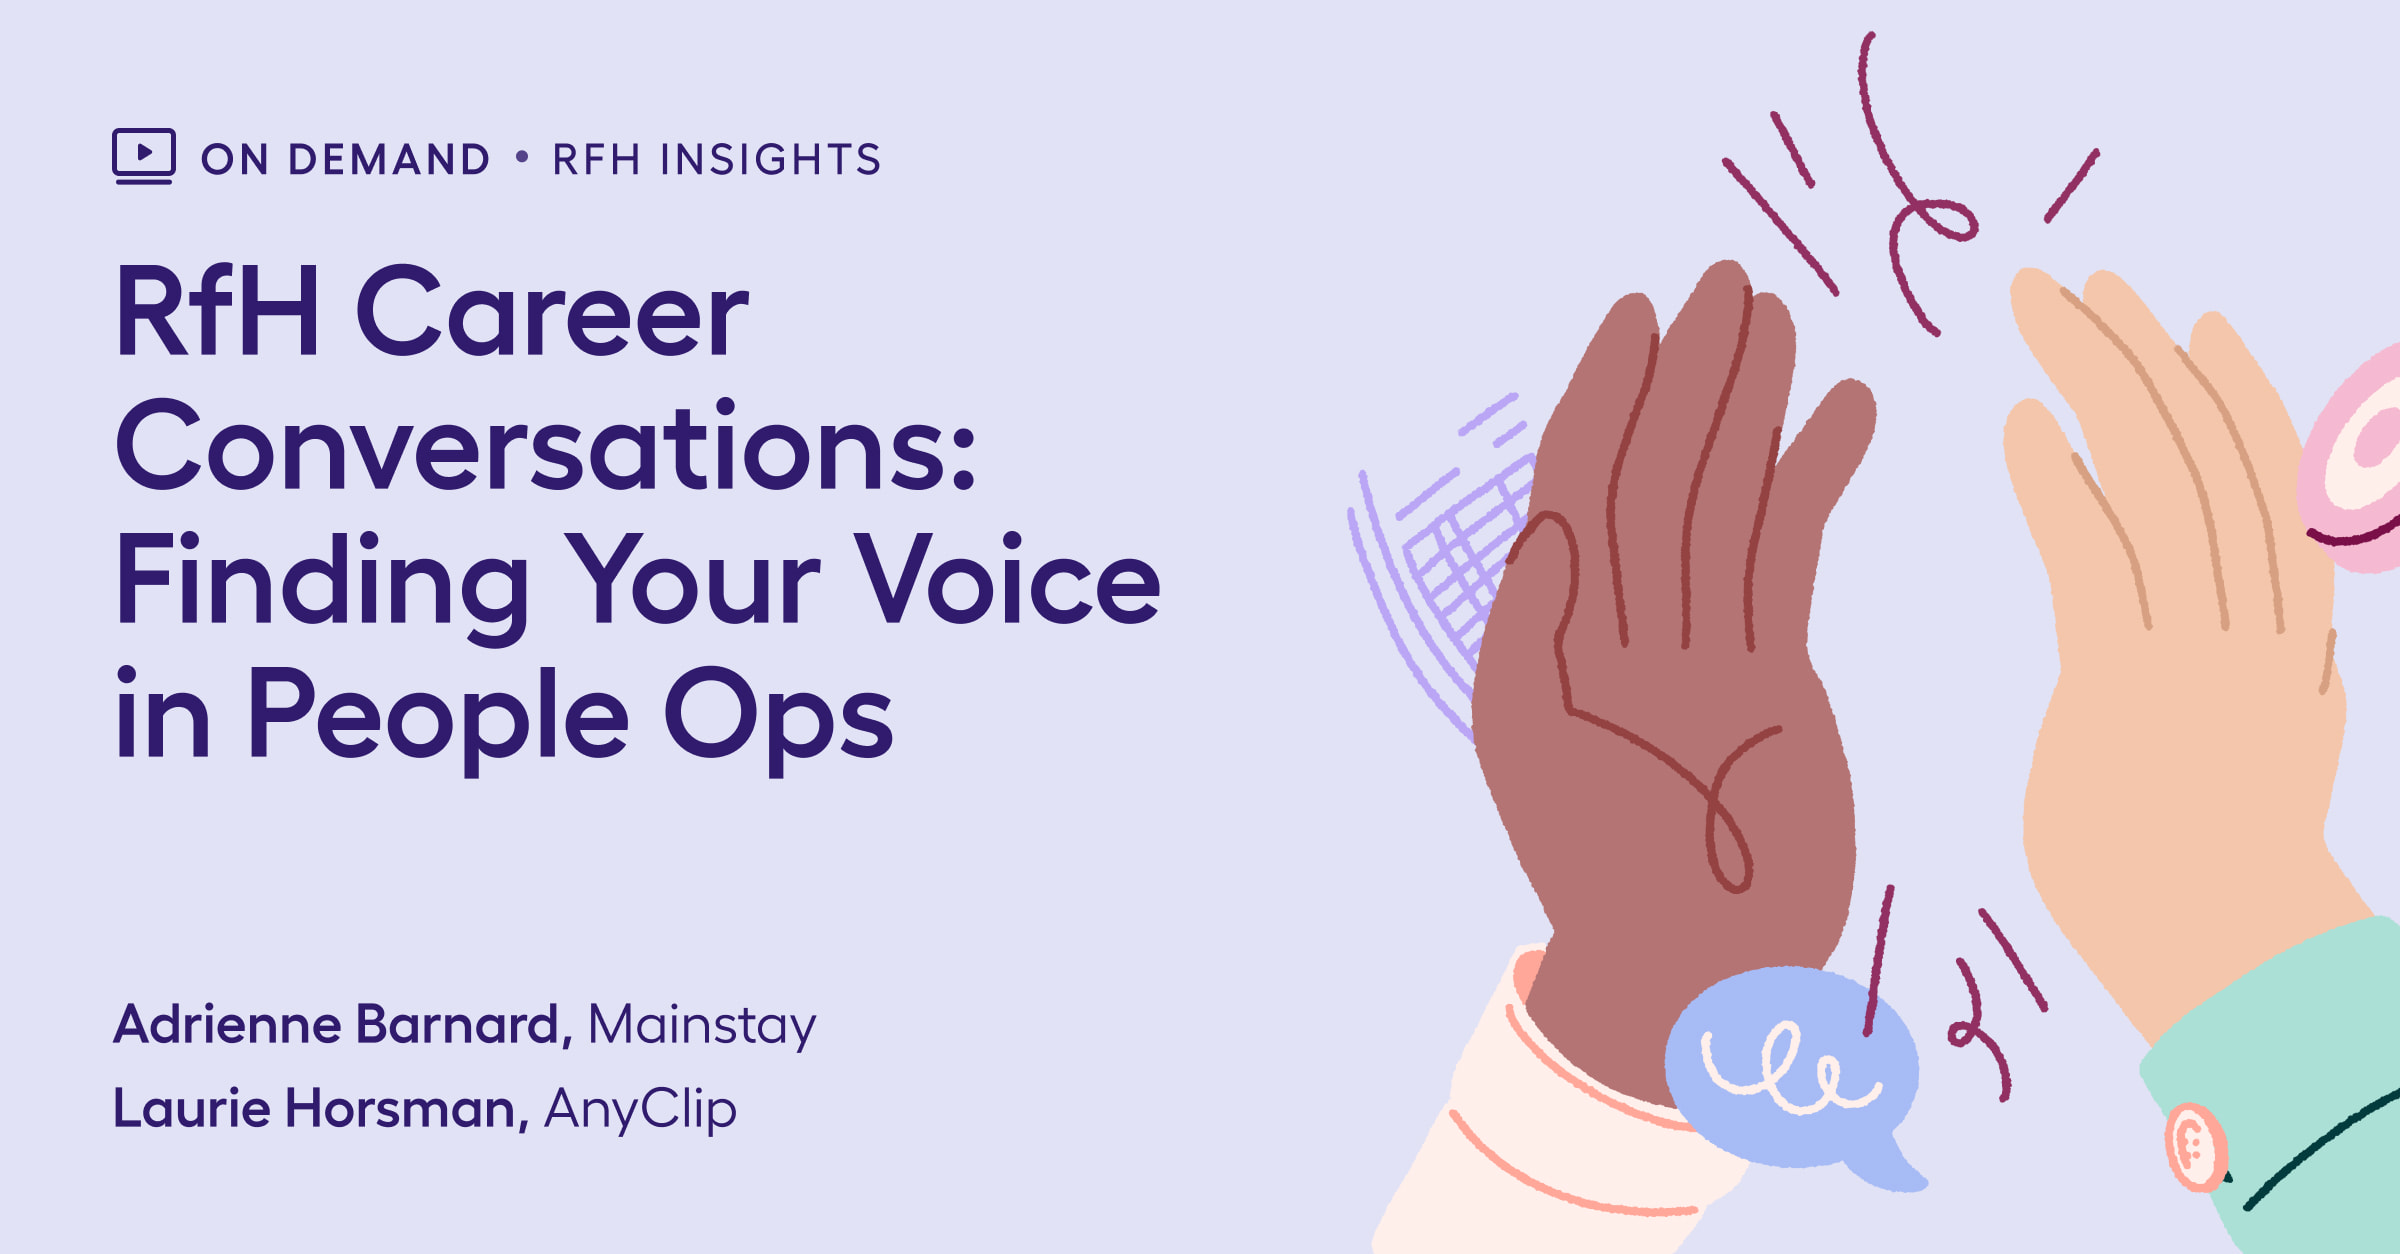 RfH Career Conversations: Finding Your Voice in People Ops